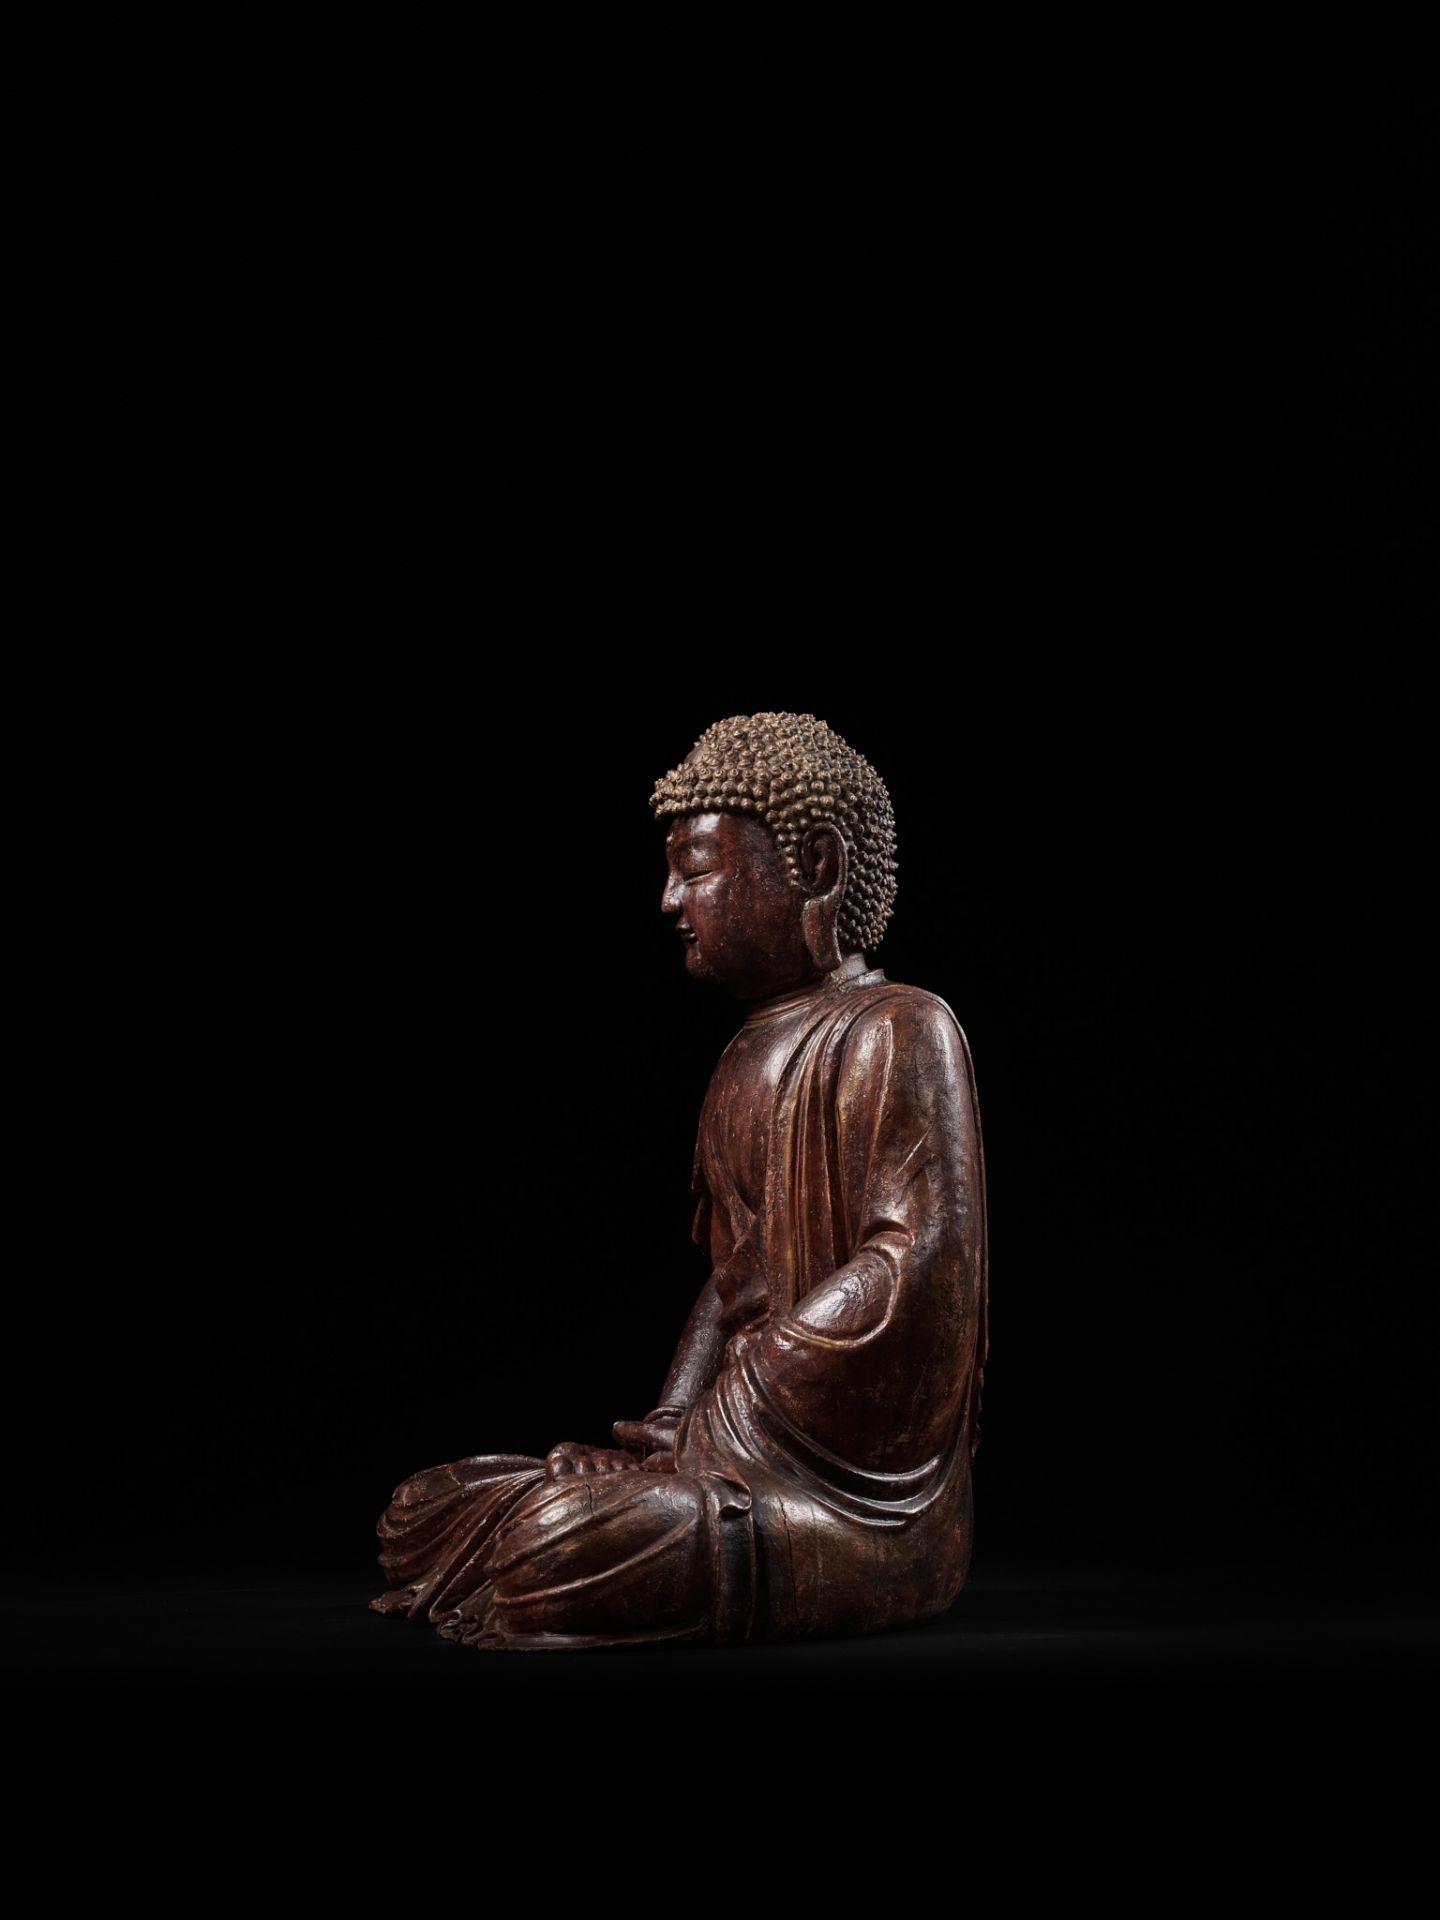 A LARGE LACQUERED WOOD FIGURE OF BUDDHA, LATE MING/EARLY QING DYNASTY, CIRCA 17TH CENTURY - Image 5 of 9